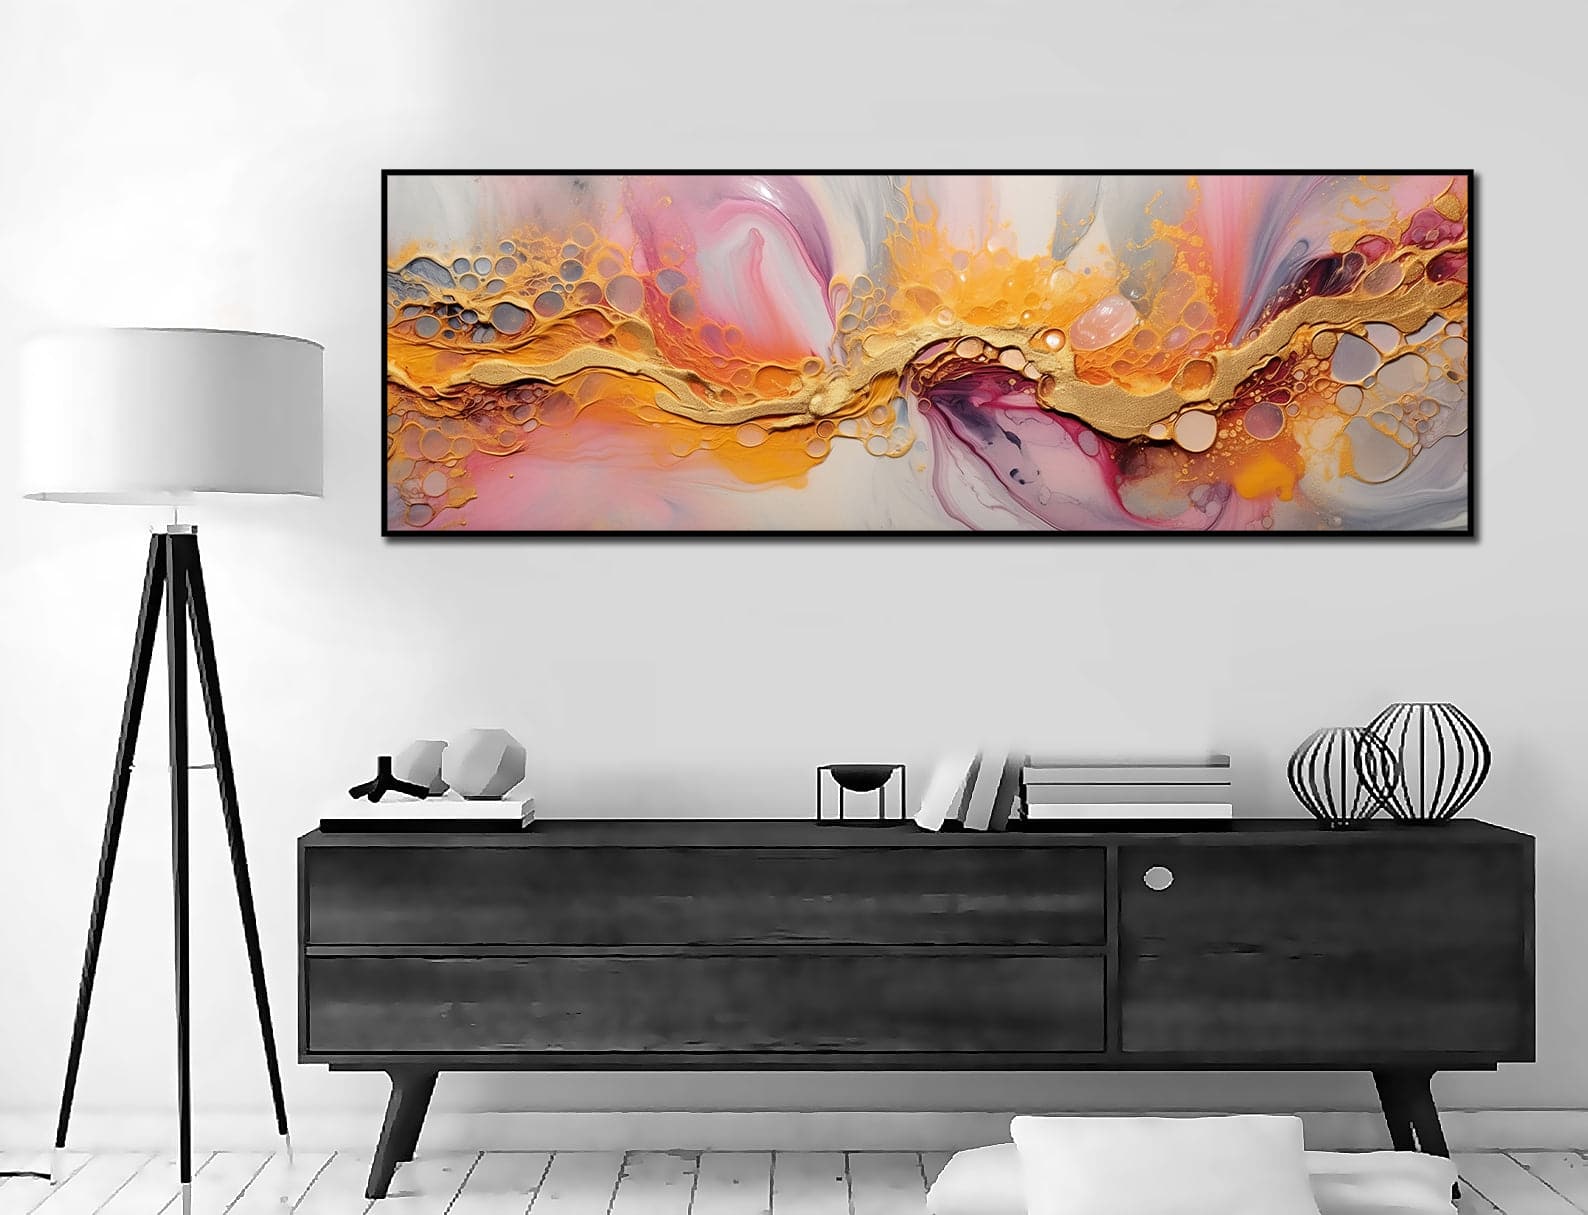 Framed 1 Panel - Natural Luxury Abstract Fluid